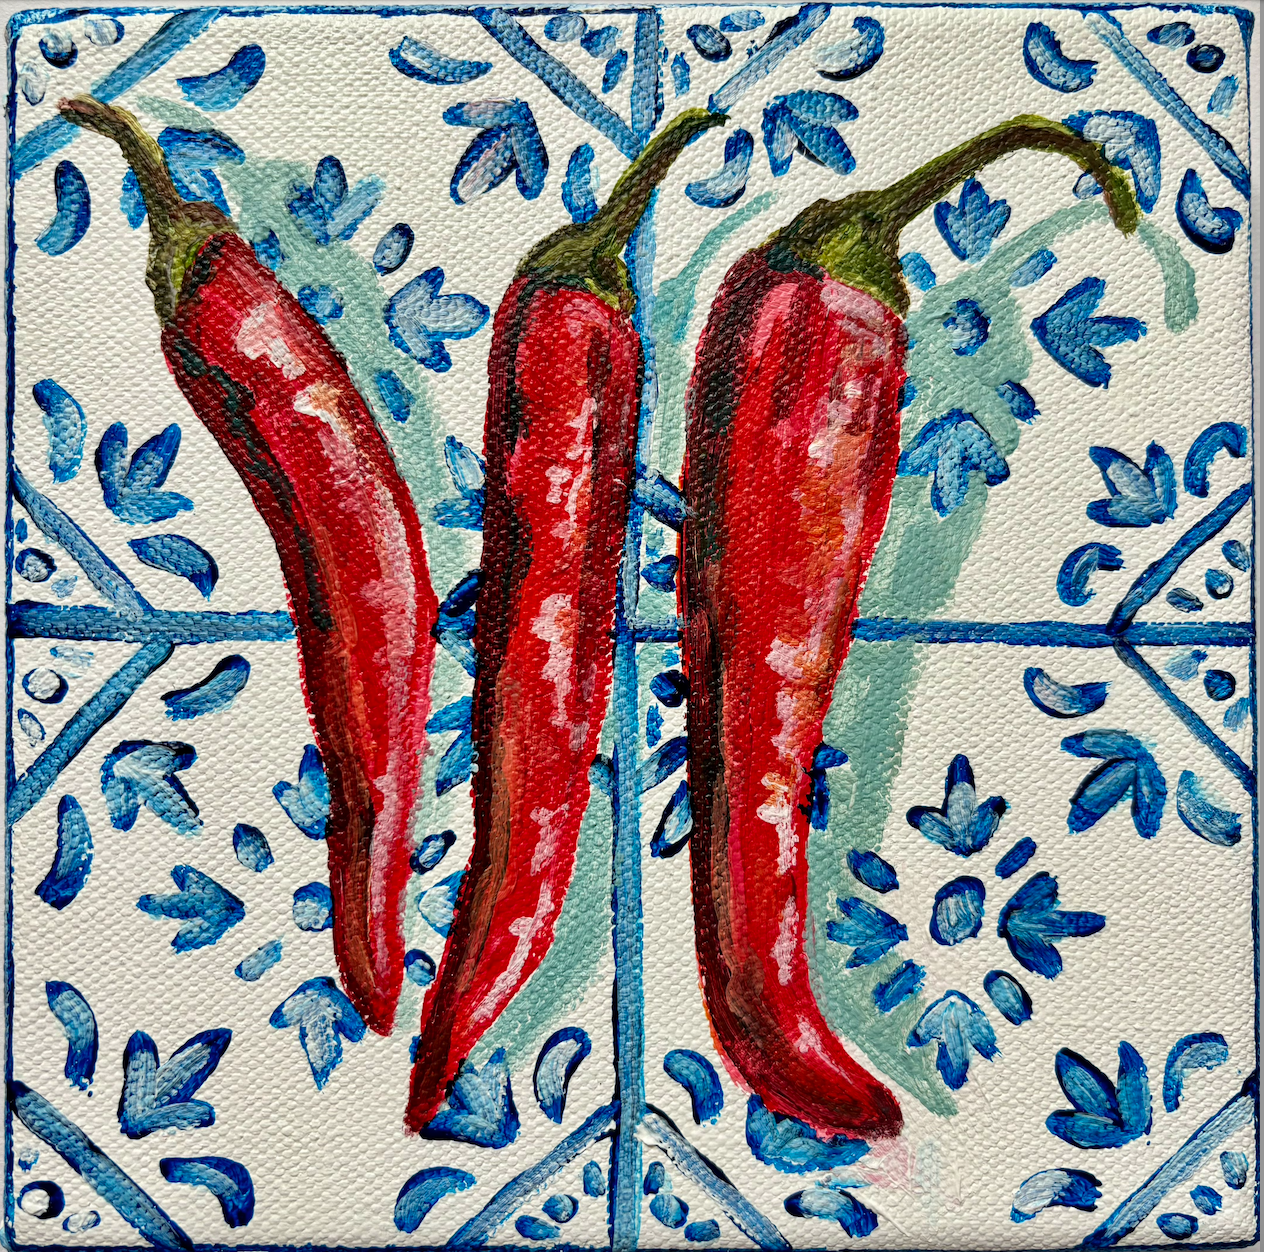 Three Chillis on Tiles by Pippa Smith